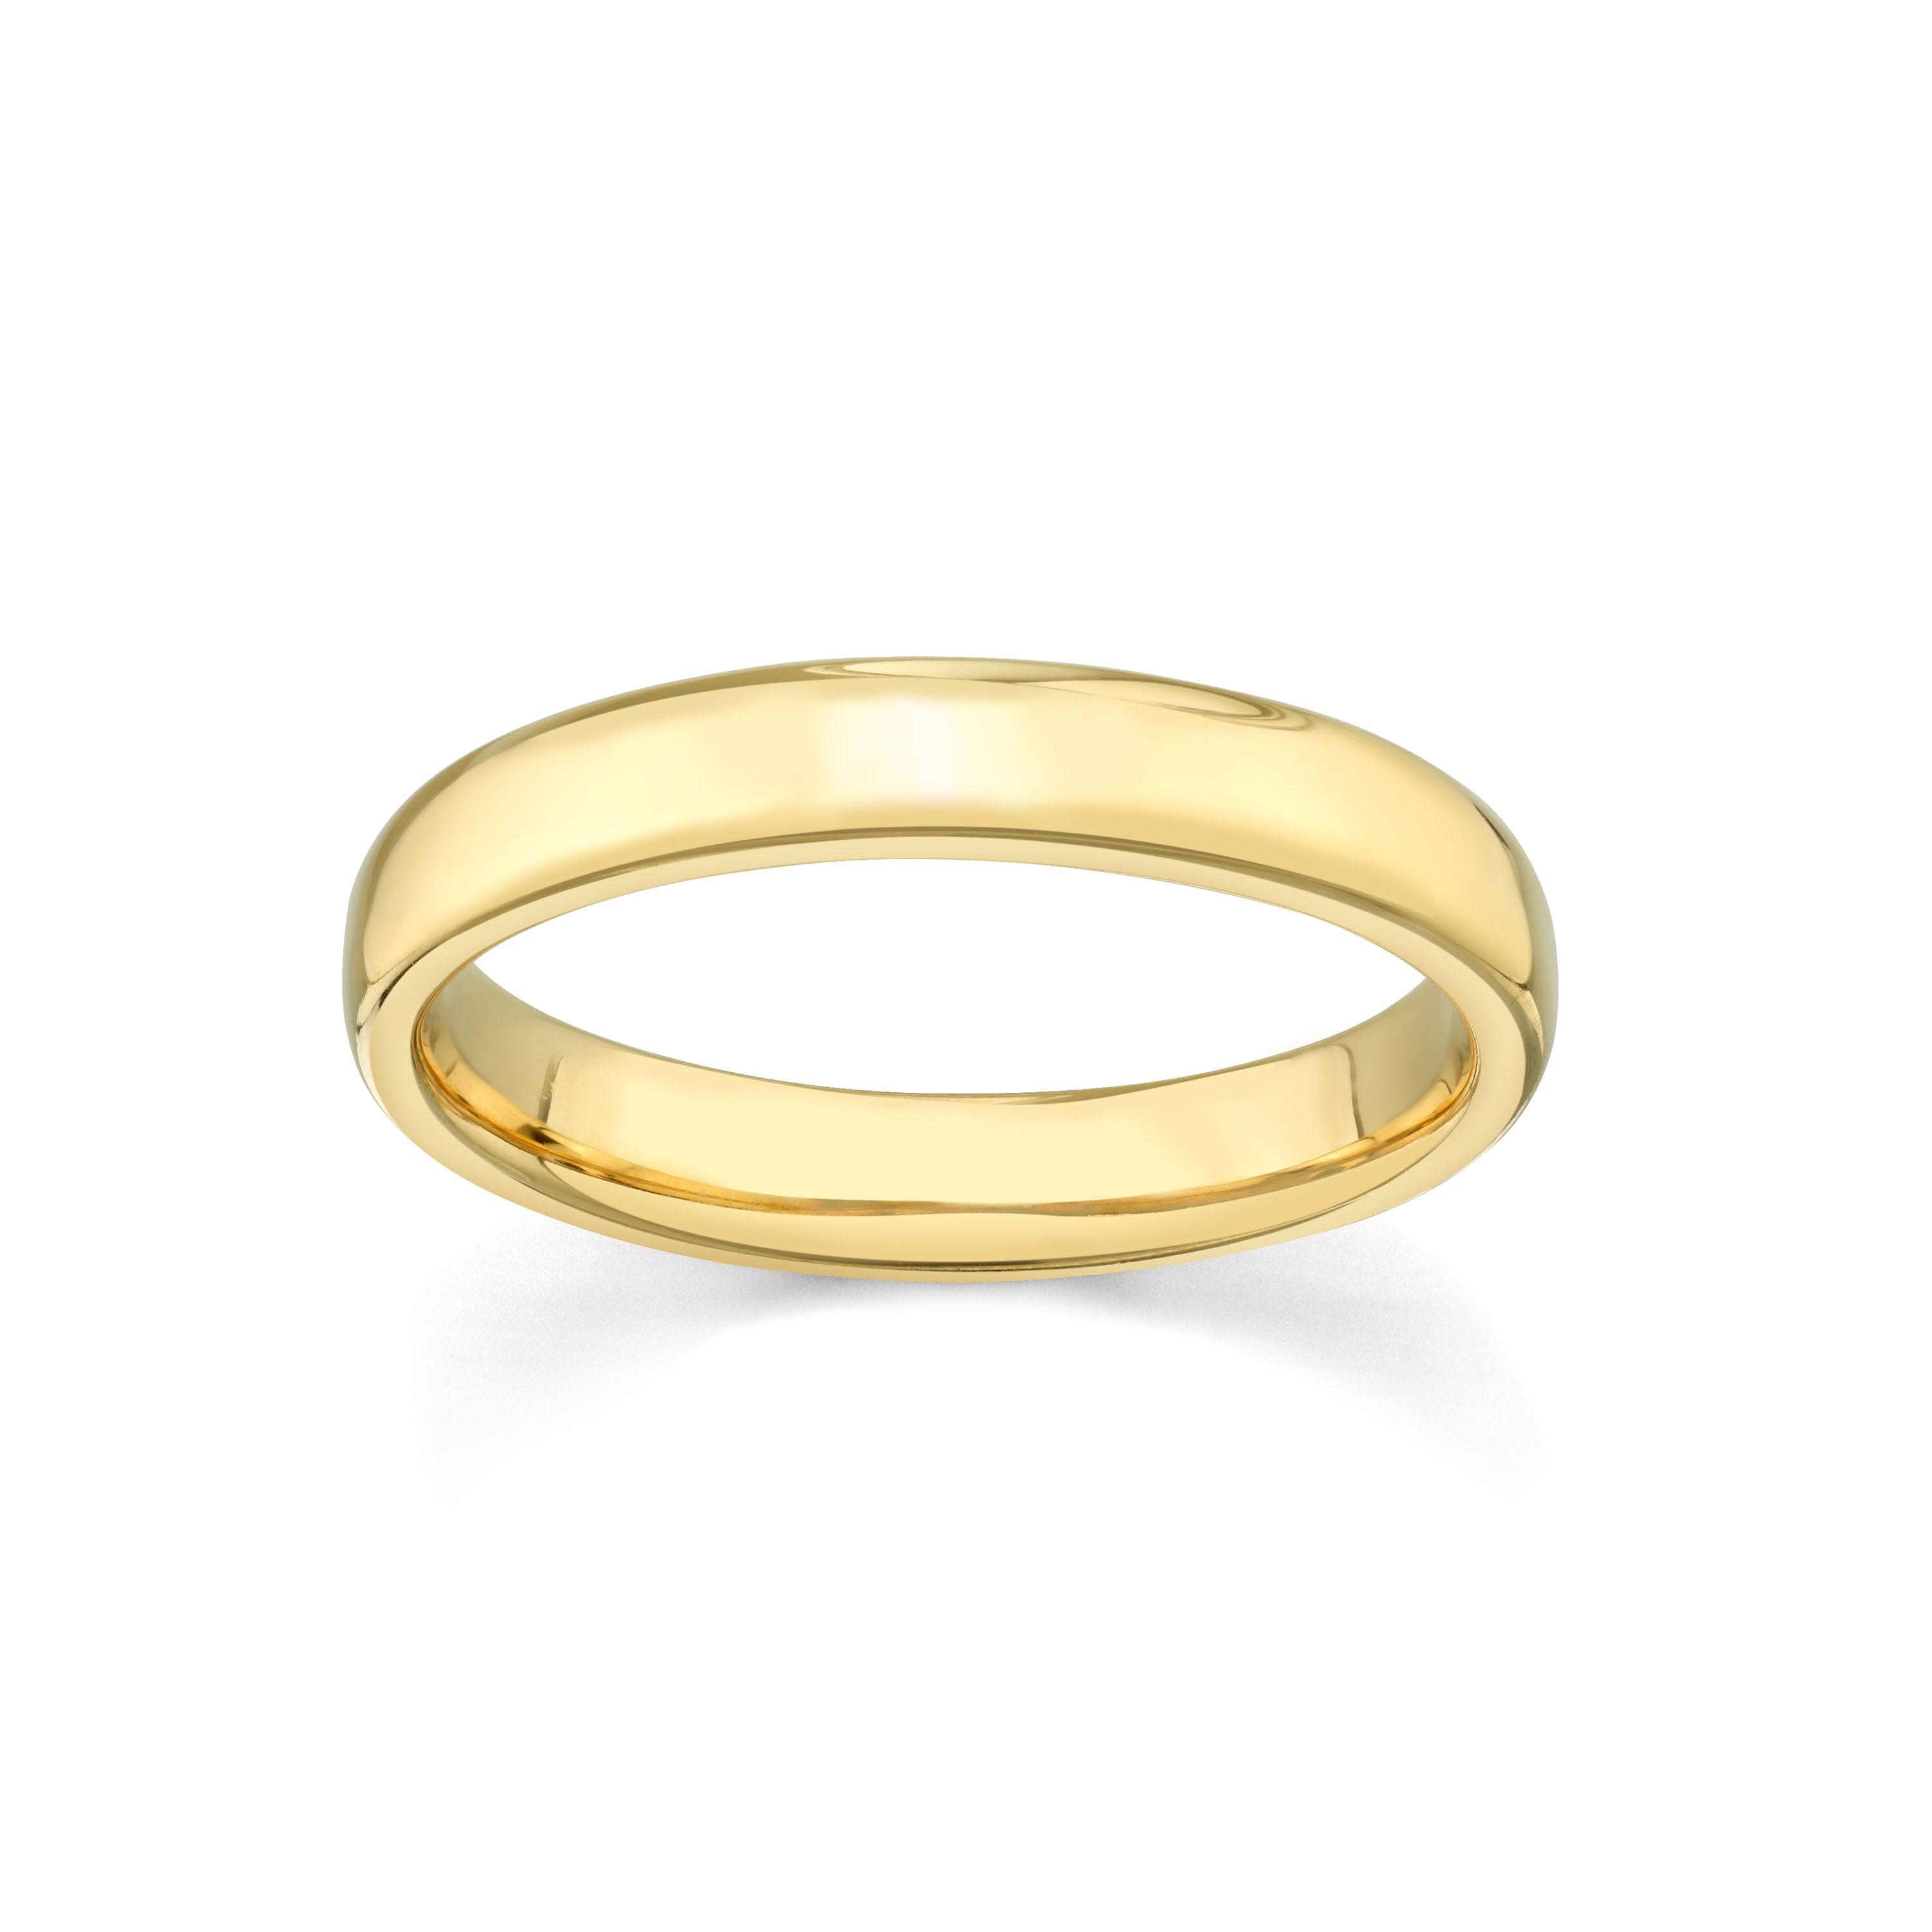 Classic Men's Band | Comfort Fit Wedding Bands for Grooms 10K Yellow Gold by Marrow Fine